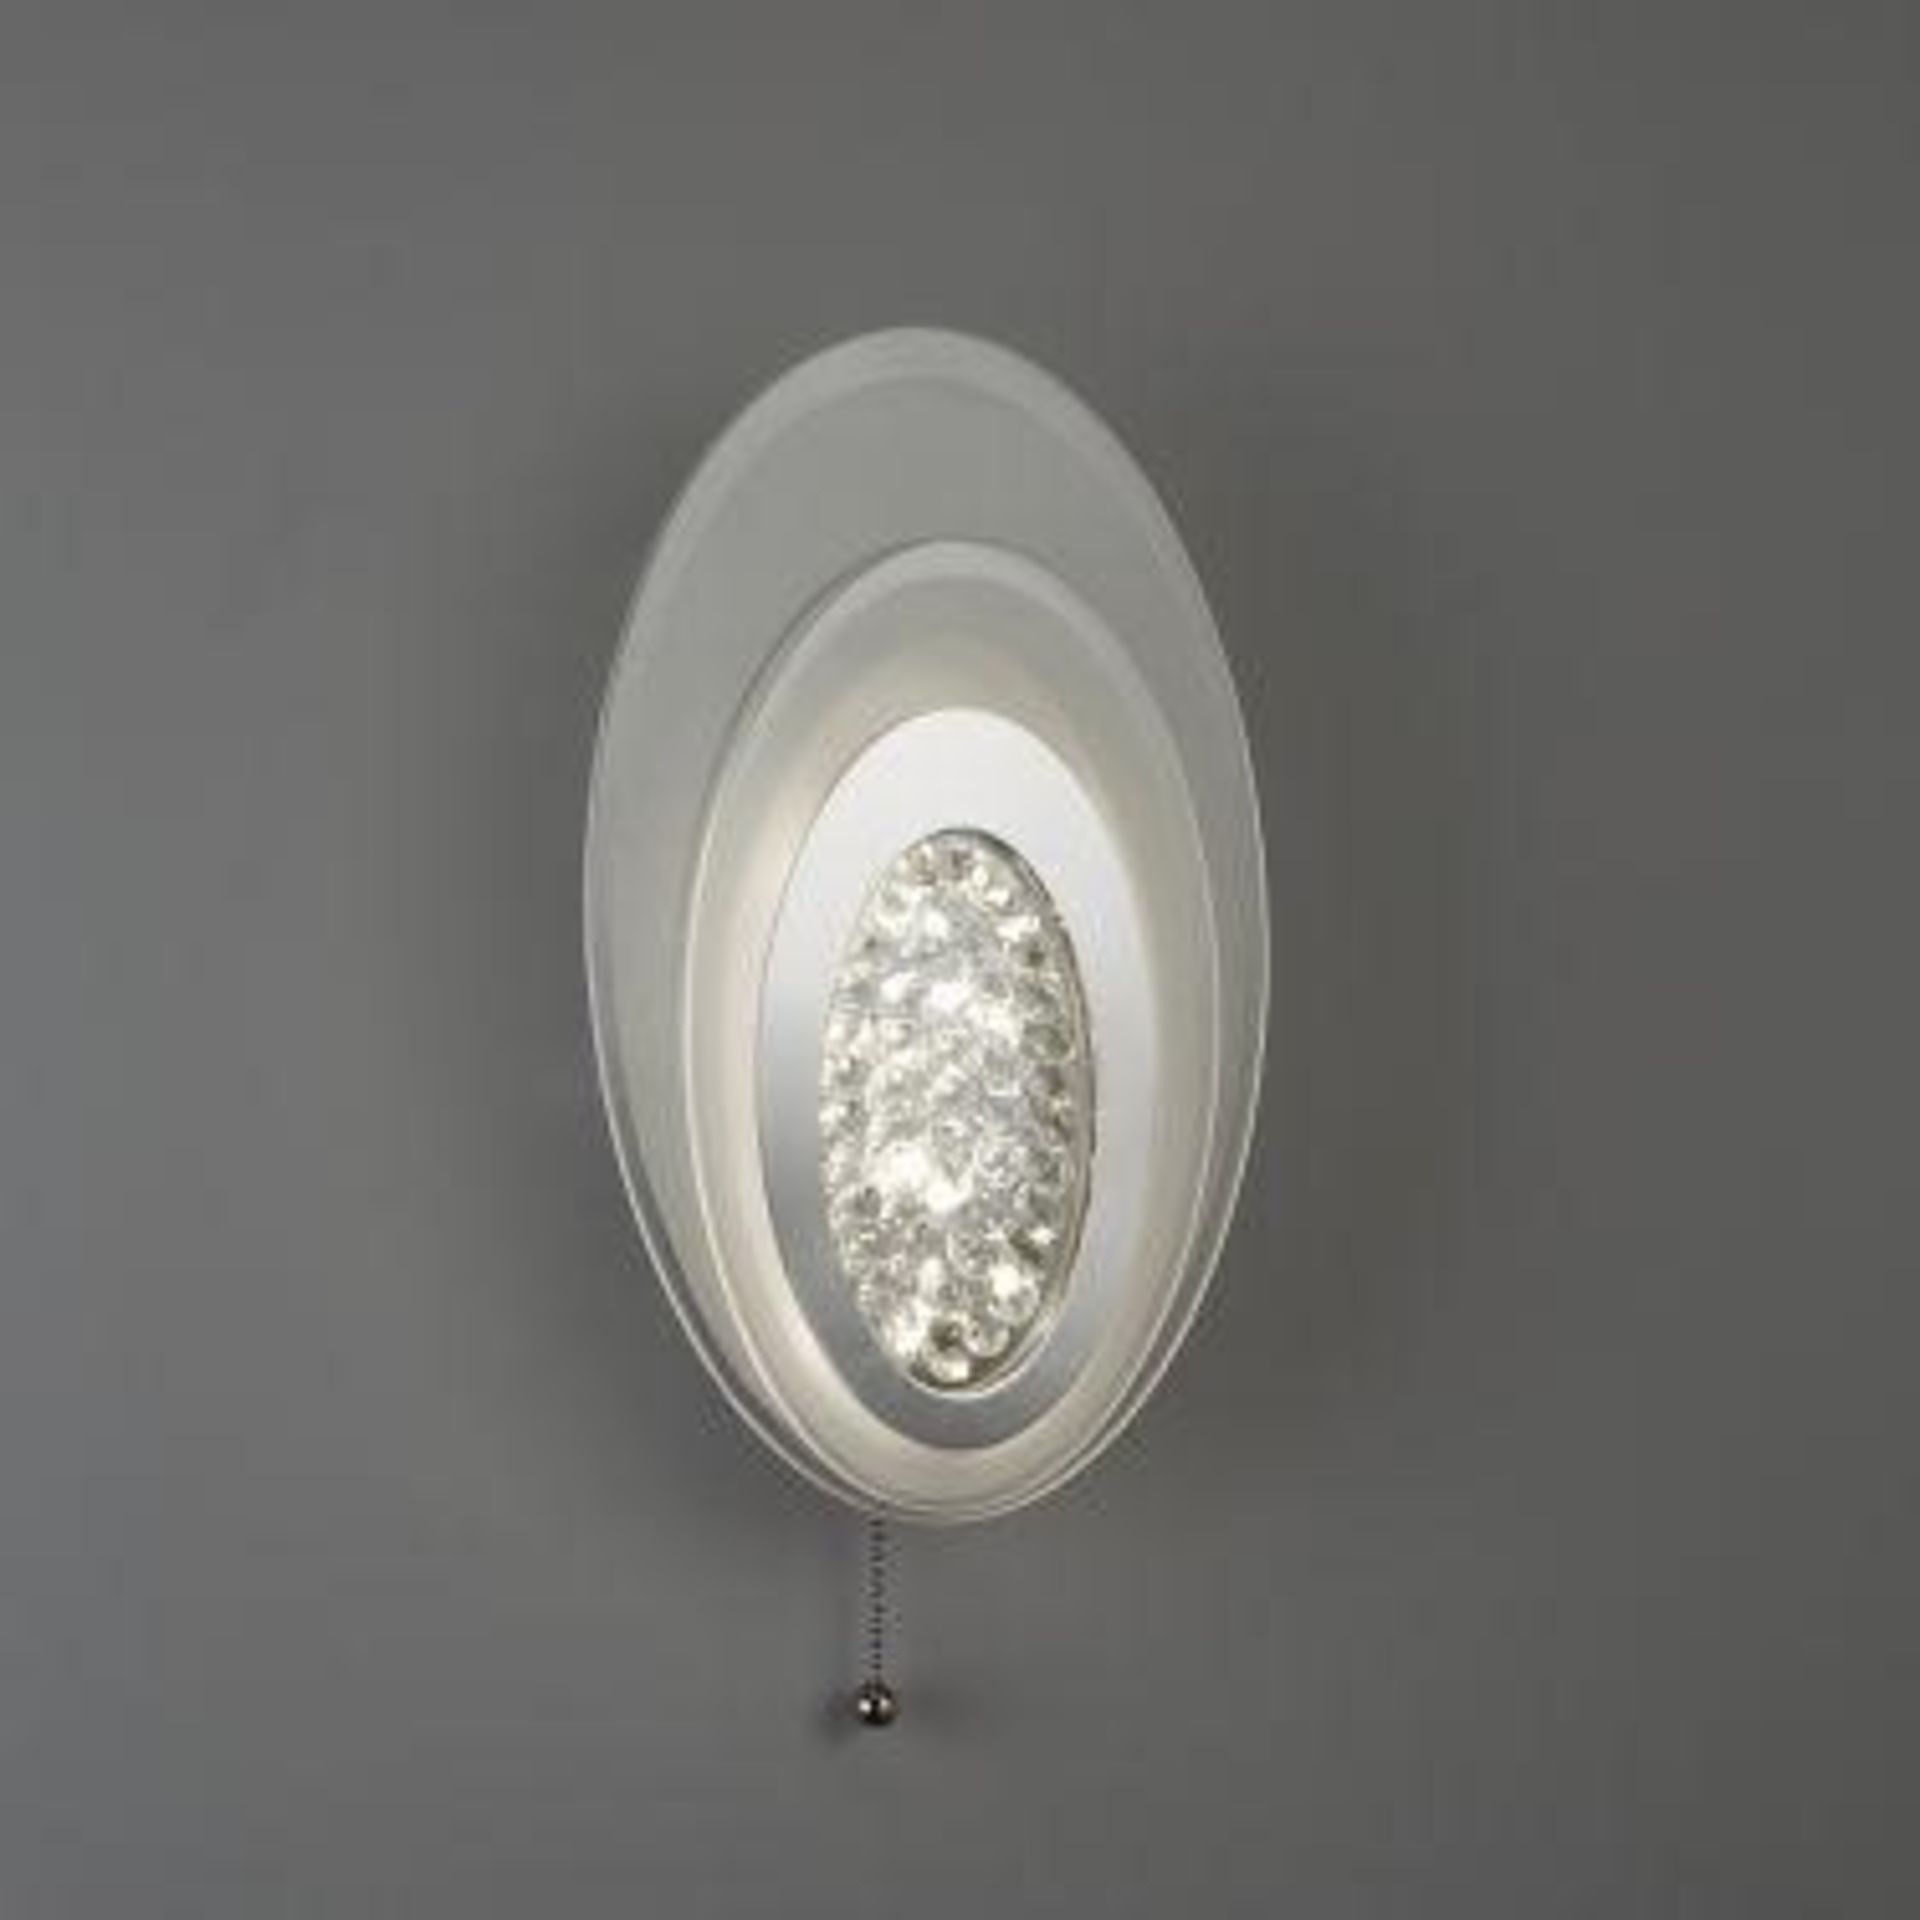 1 x LED Oval Chrome Wall Light With Frosted Glass - Ex Display Stock - CL298 - Ref J143 - Location: